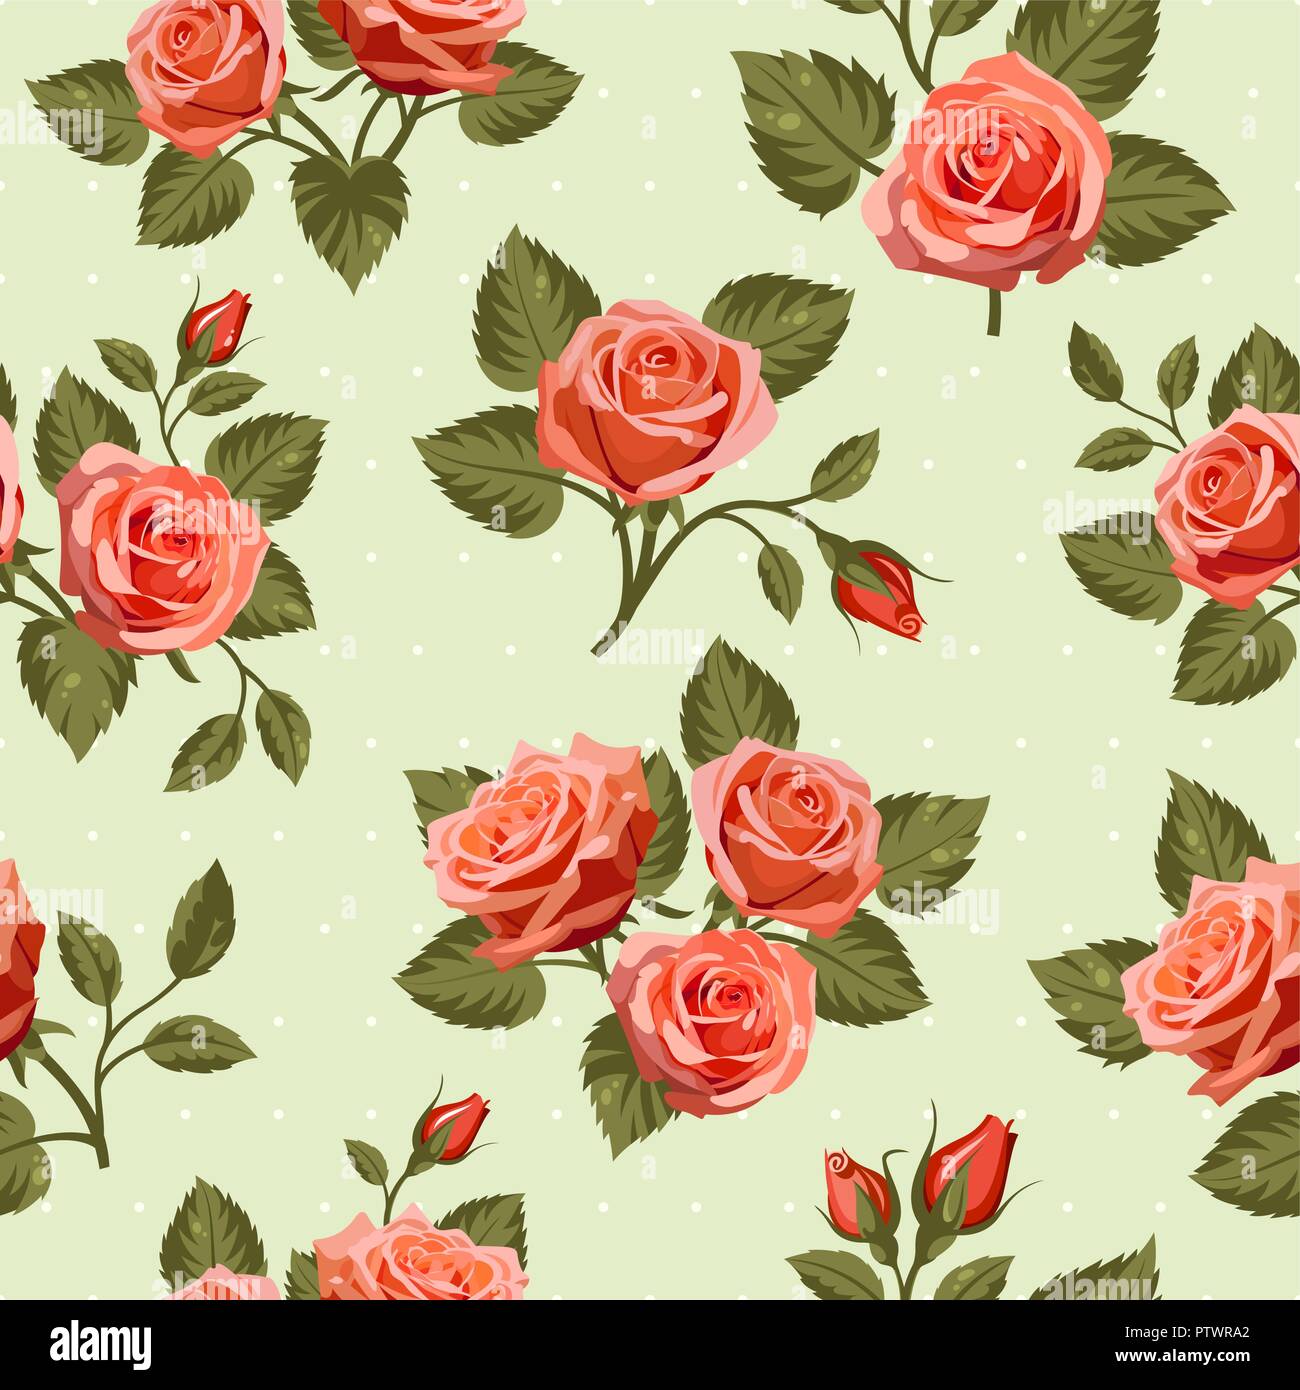 Floral seamless background with red roses.  Use for fabric design, pattern fills and decorating greeting cards, invitations Stock Vector